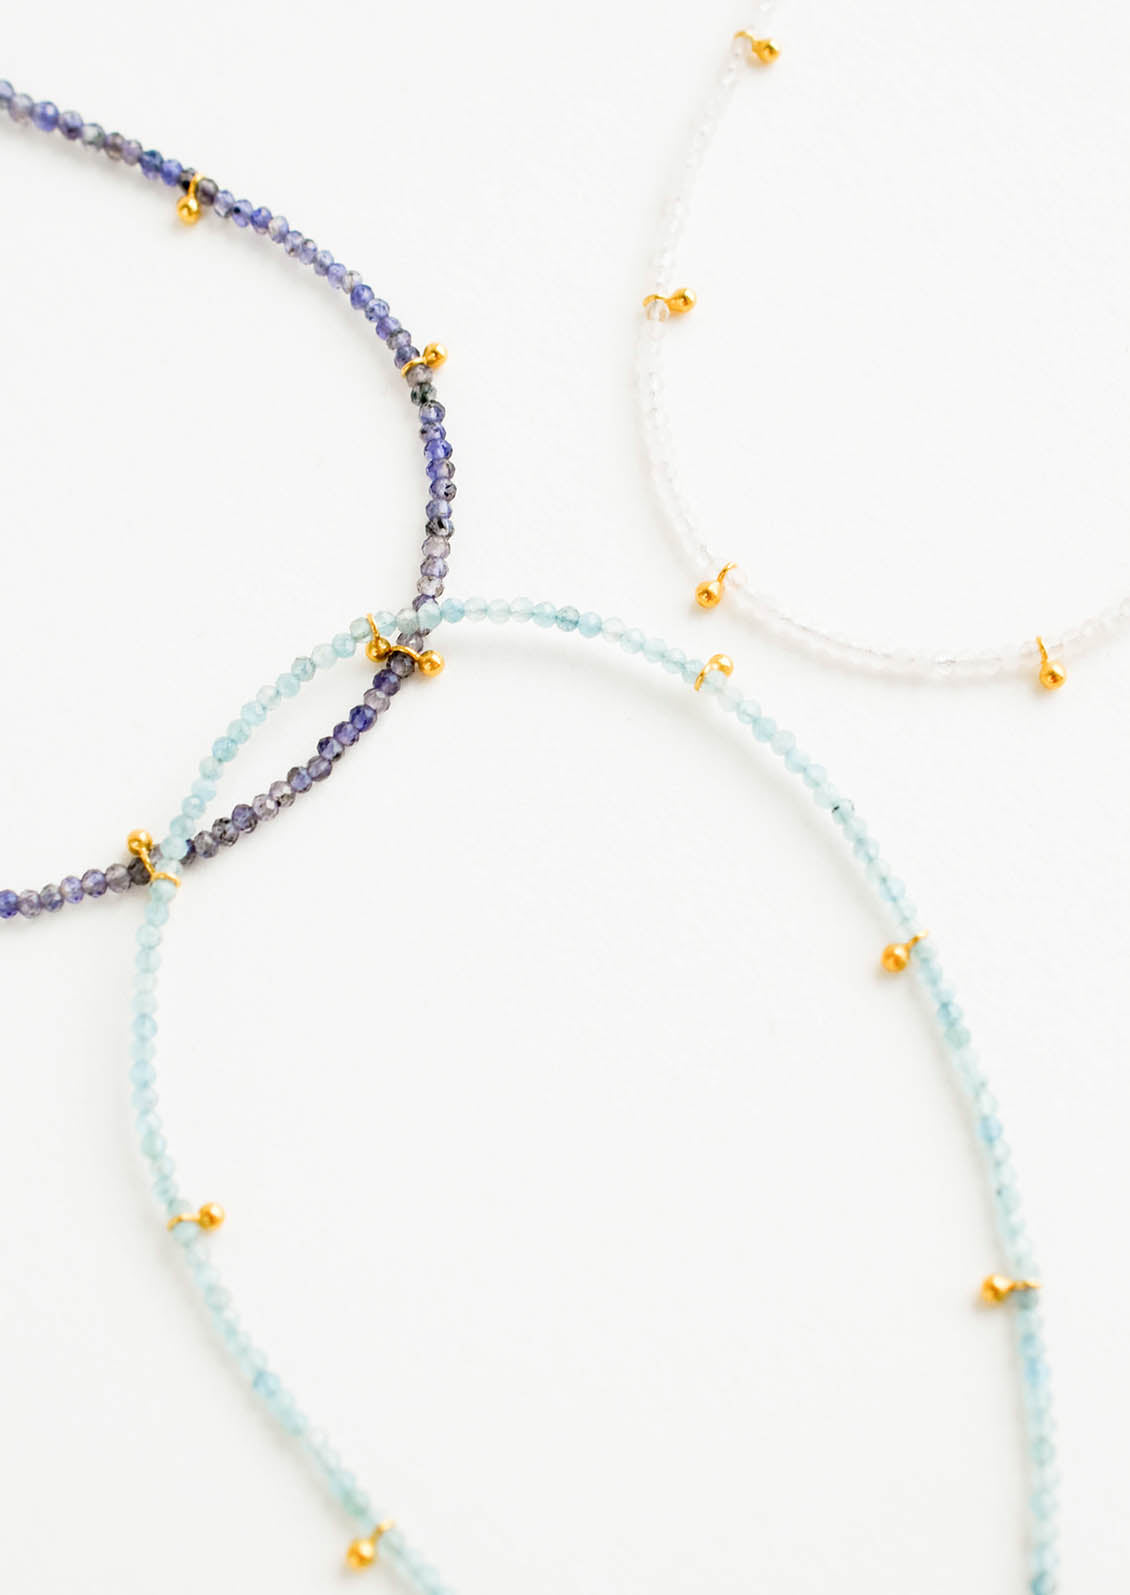 Three necklaces of gemstones and gold beads.